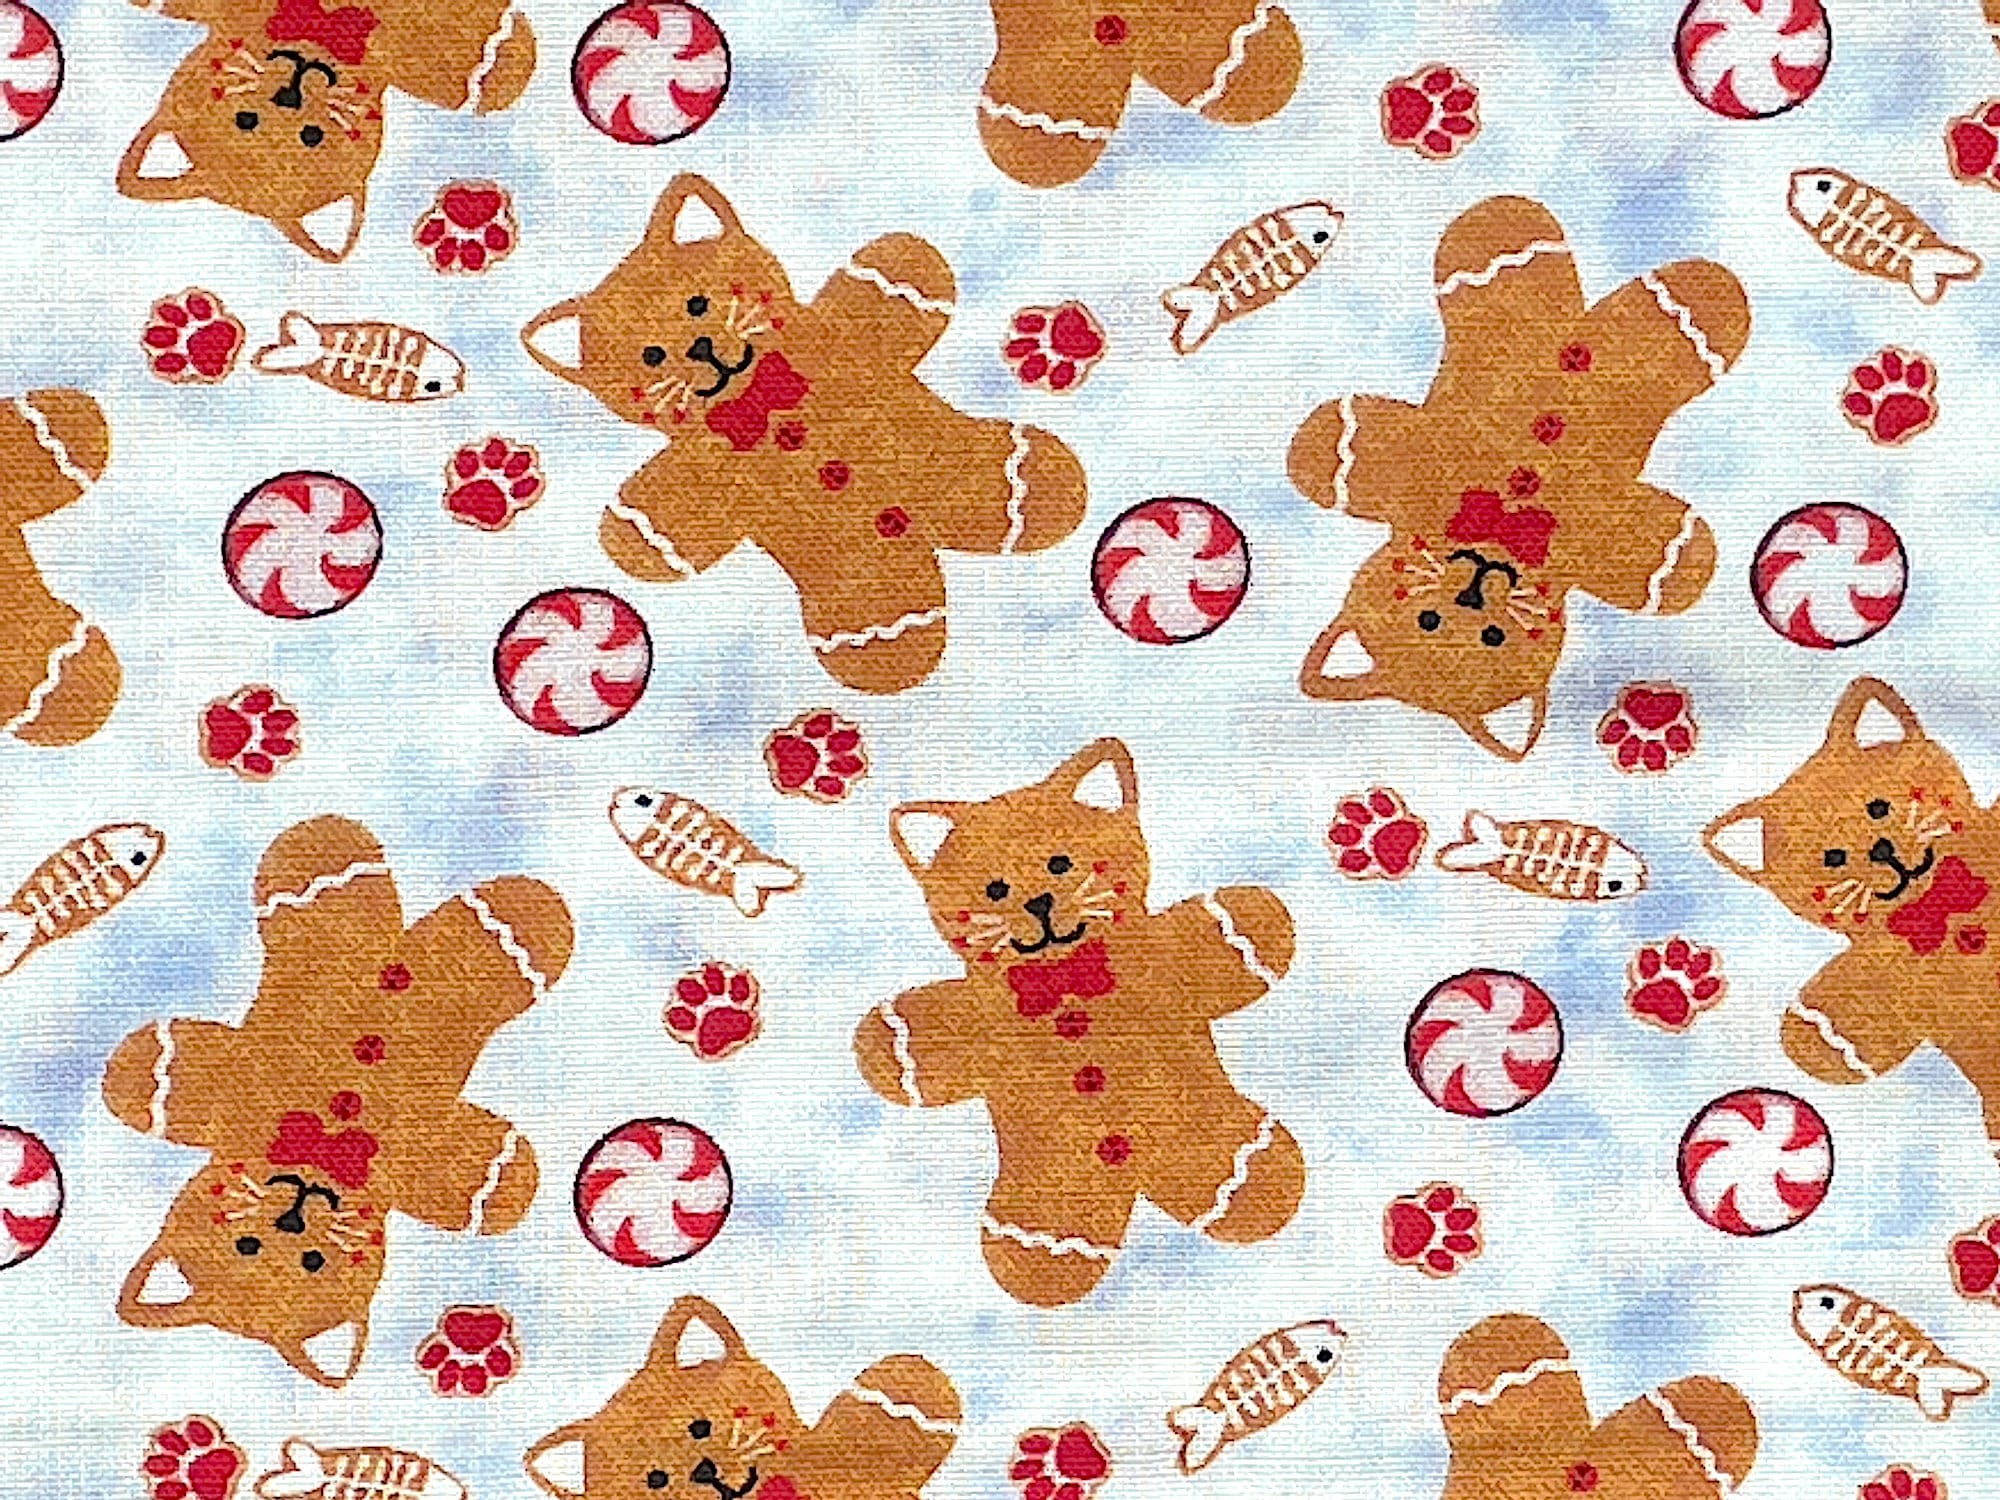 Close up of gingerbread kittens, candies and paw prints.